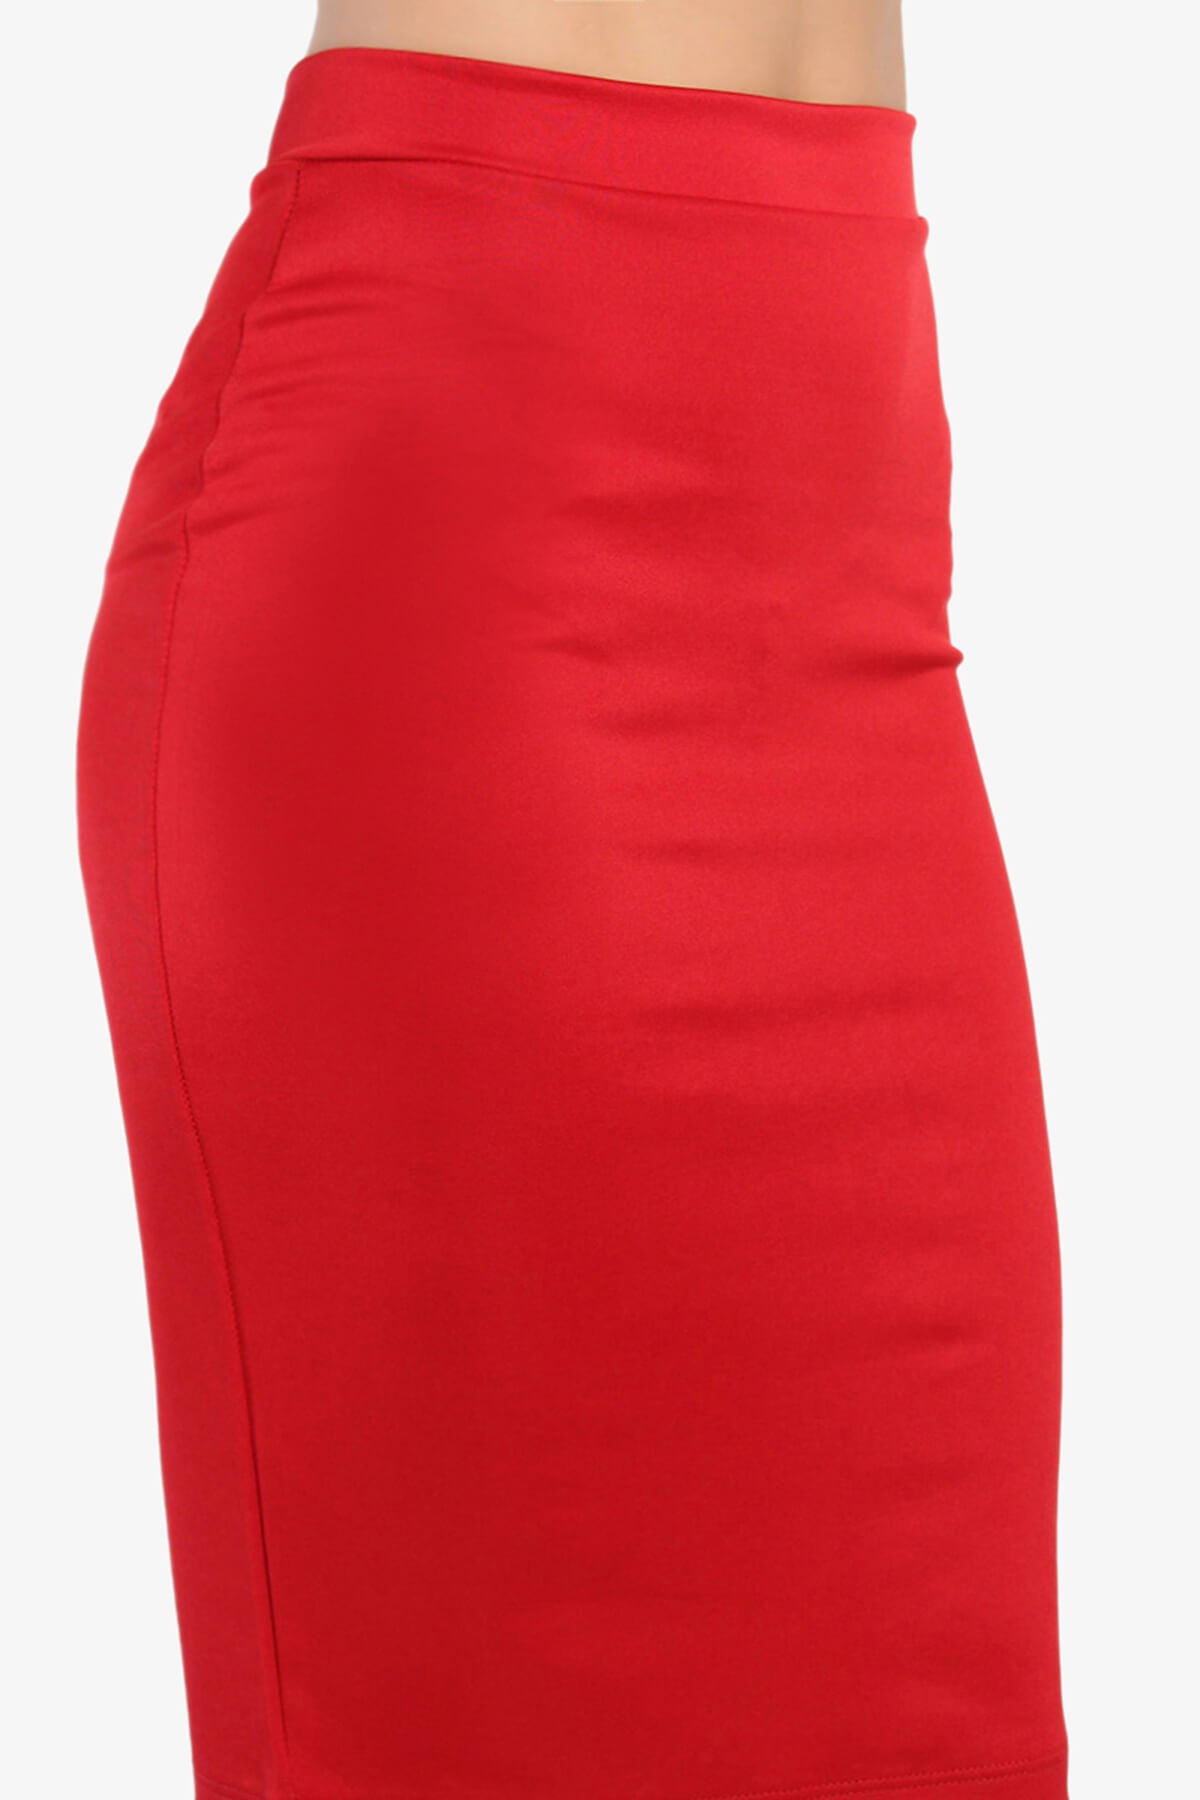 Load image into Gallery viewer, Campo Stretch Ponte Knit Pencil Skirt RED_5
